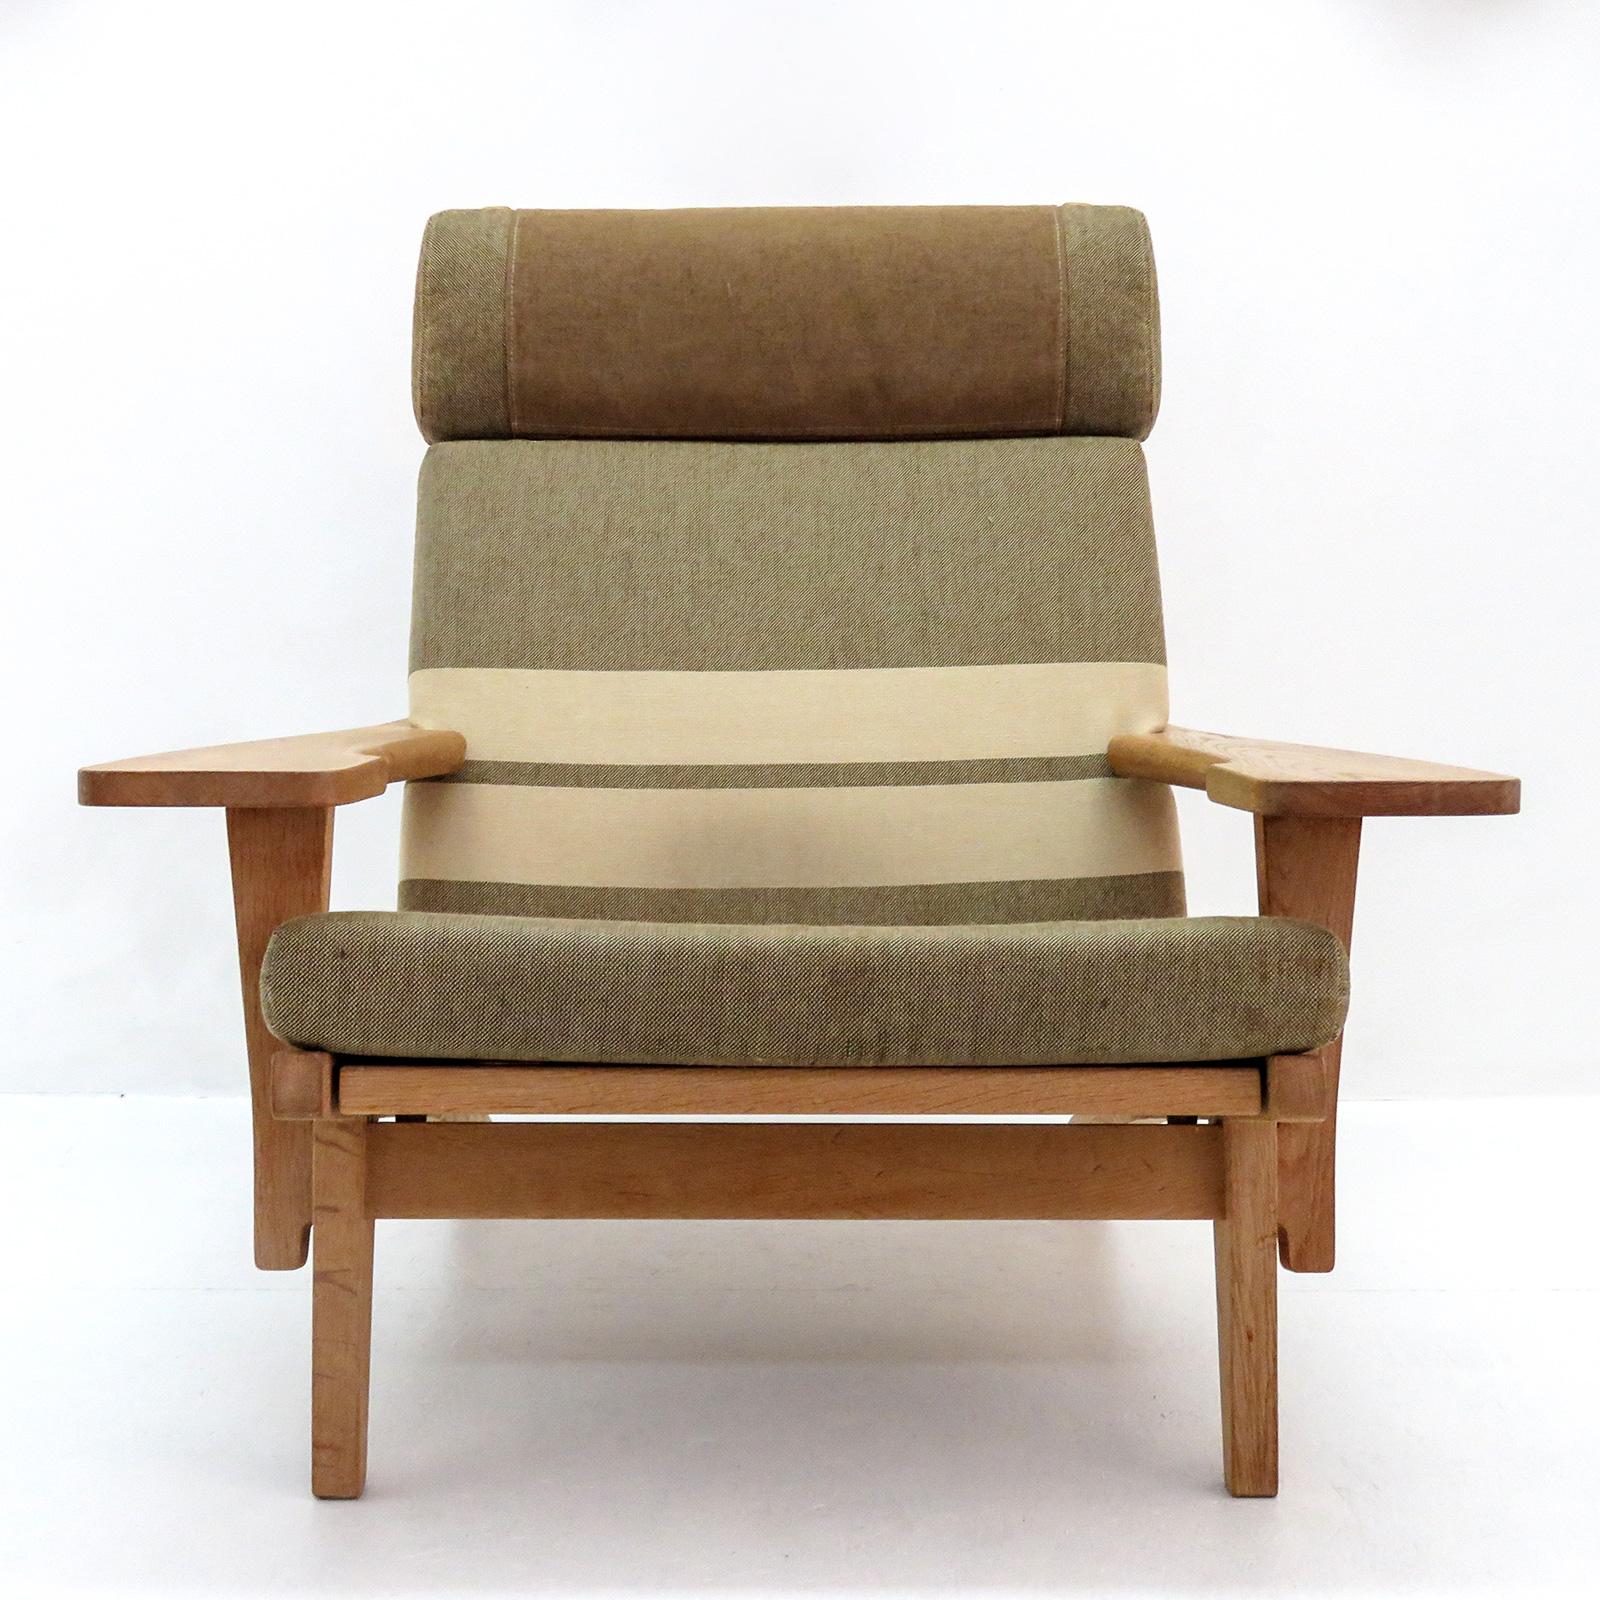 Large-scale high back armchair by Hans Wegner with solid oak frame and original cushions in greenish striped wool, produced by GETAMA in 1969, model GE 375, detachable neck cushion, original makers mark to underside.